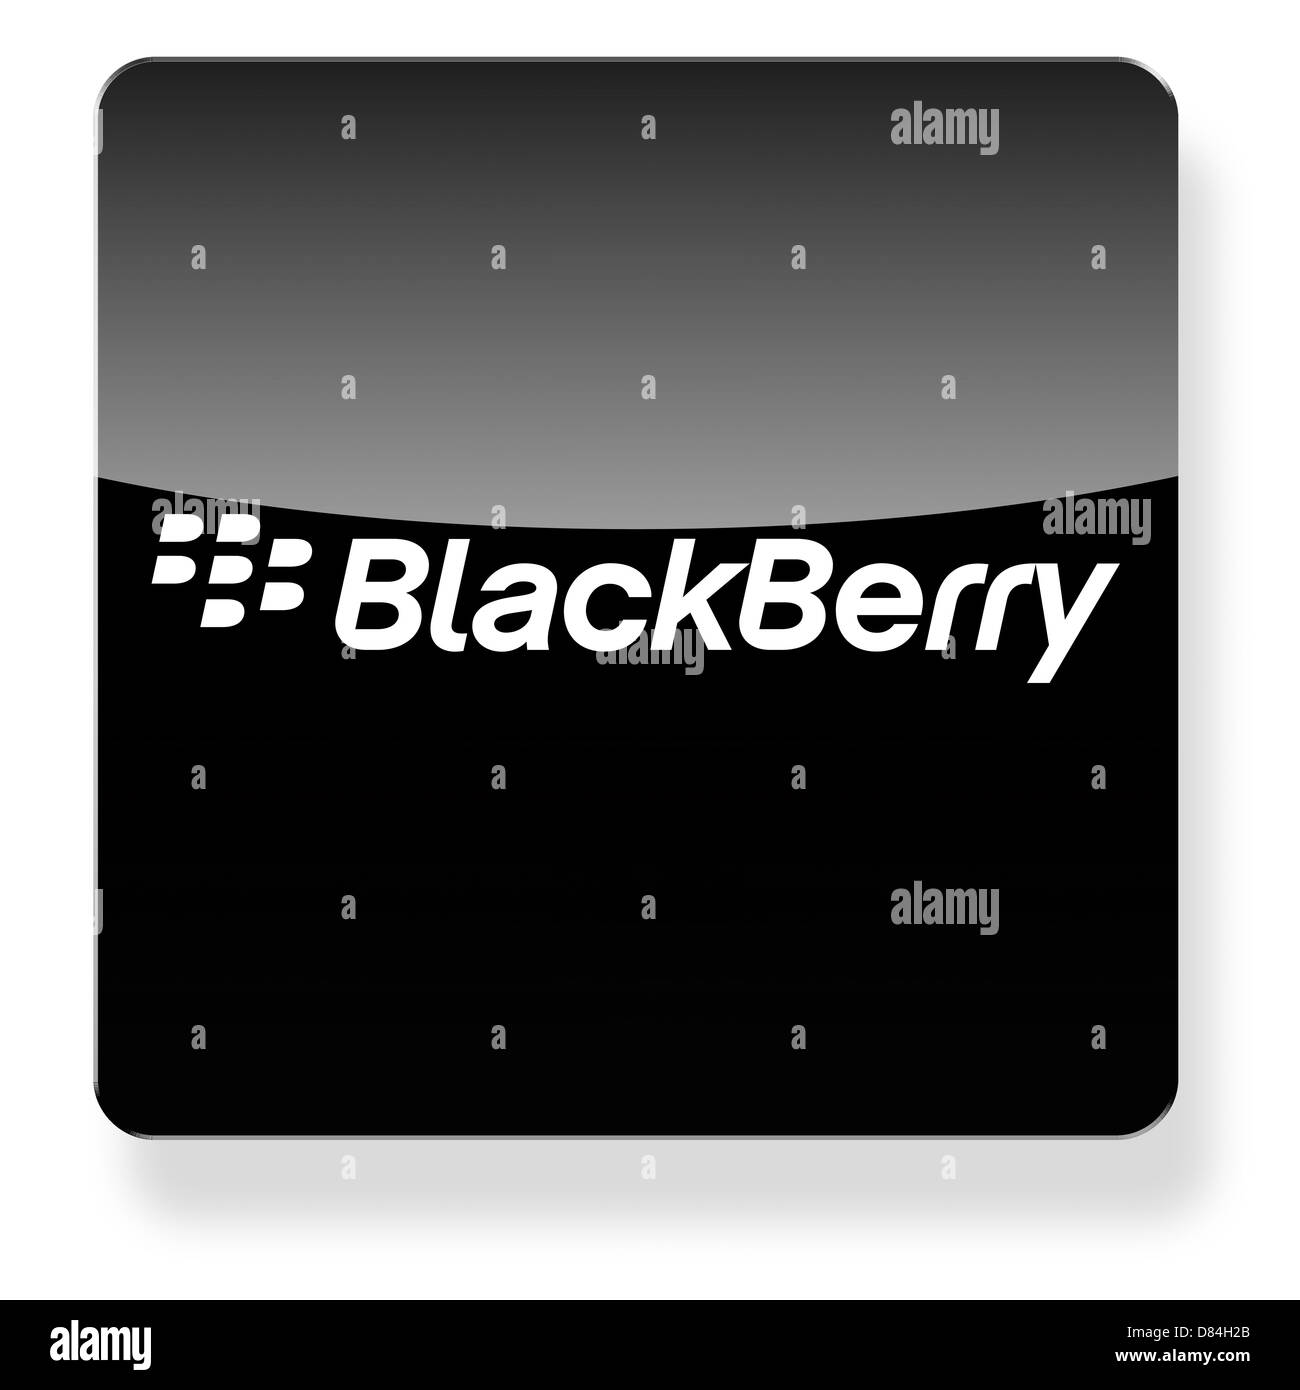 BlackBerry logo as an app icon. Clipping path included. Stock Photo